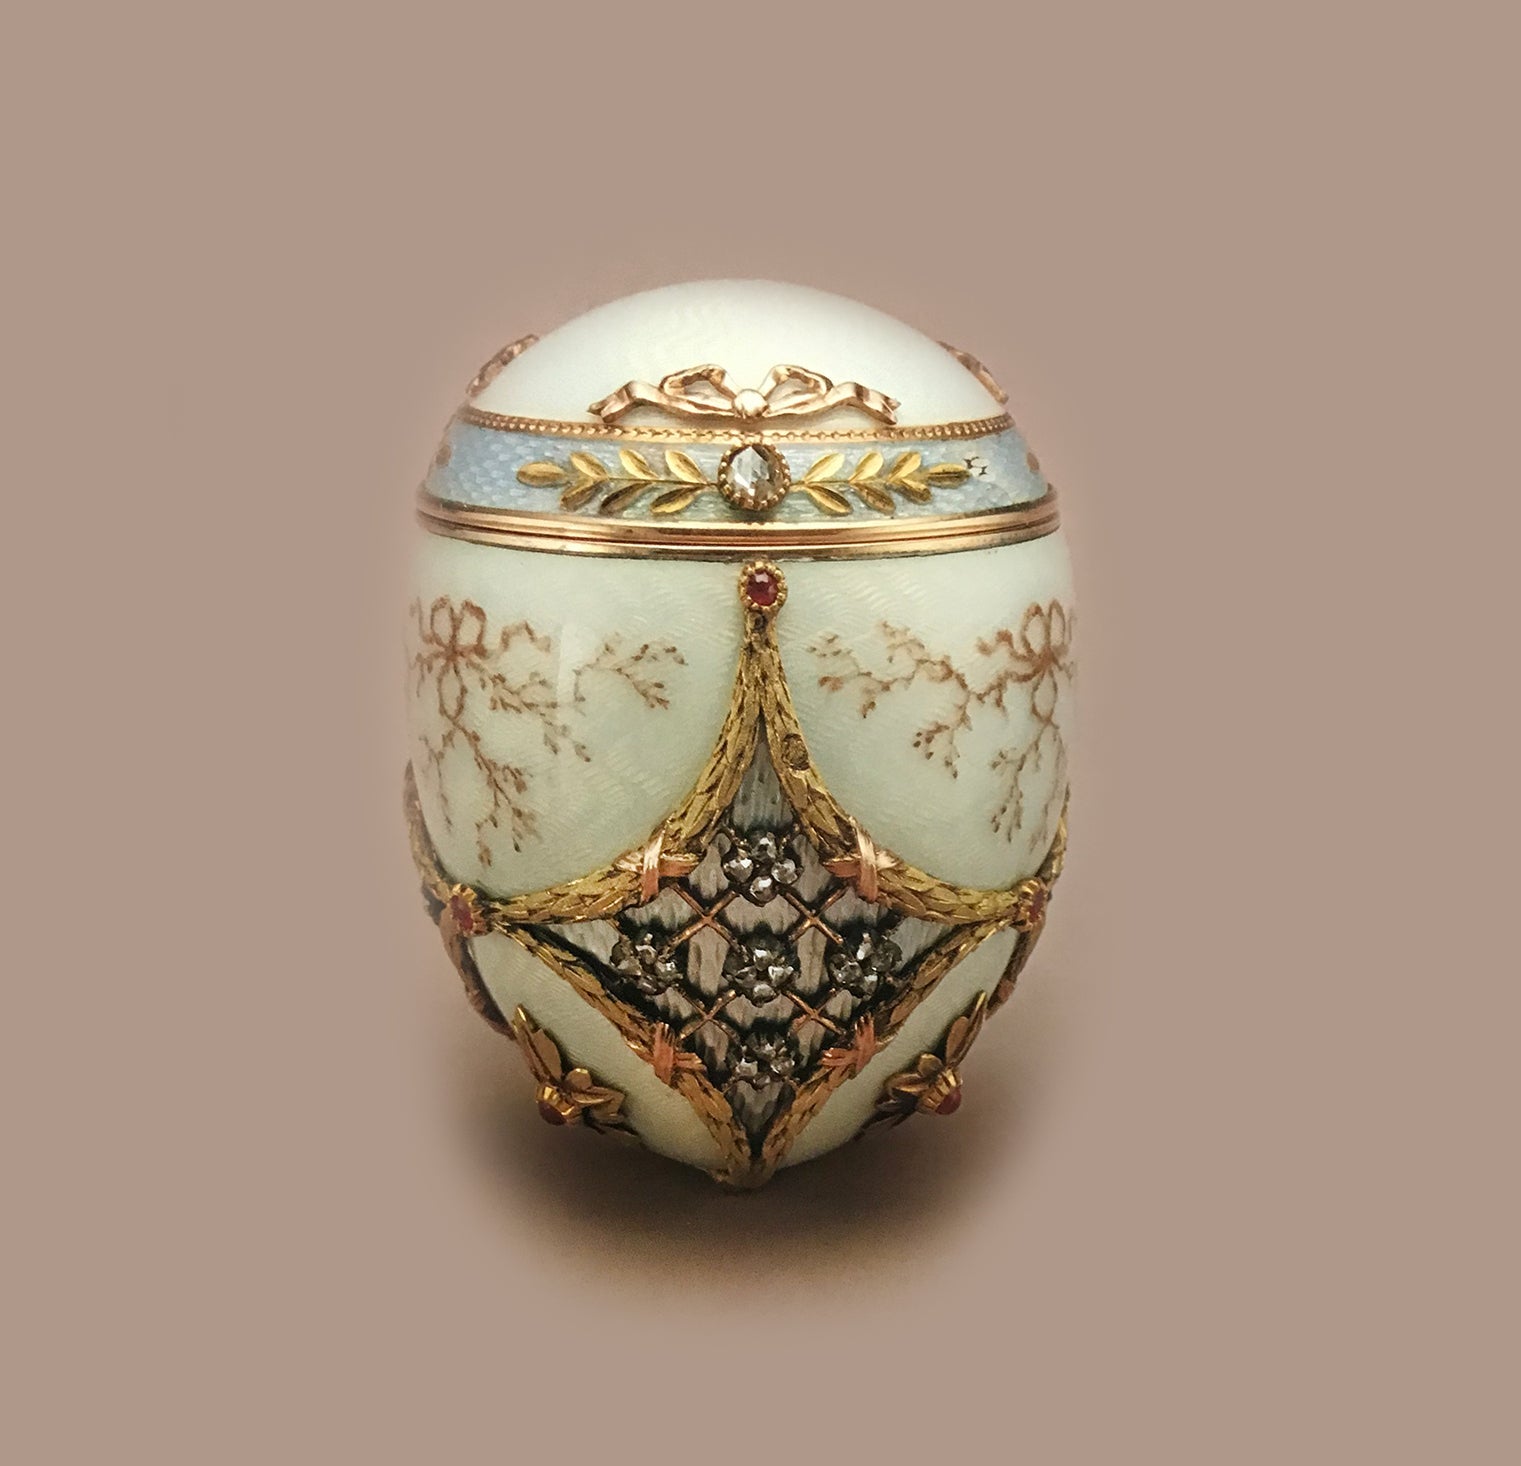 Faberge Easter Gifts: The Perfect Jewelry For The Richest People - DSF Antique Jewelry